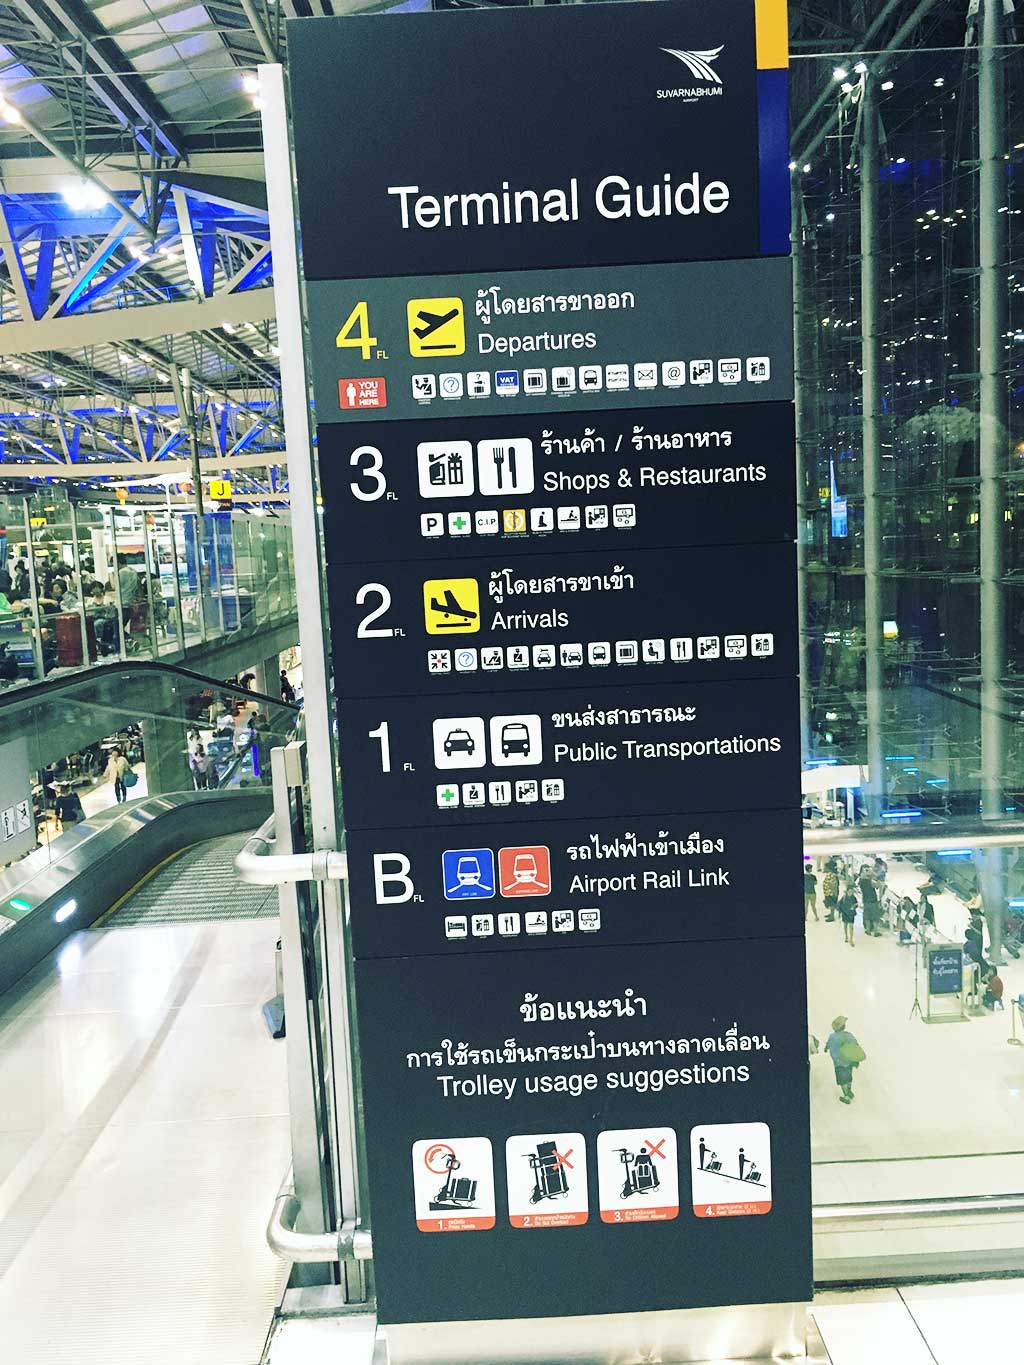 How to Get to Pattaya from Suvarnabhumi Airport for 120 Baht - Terminal Guide - Thailand